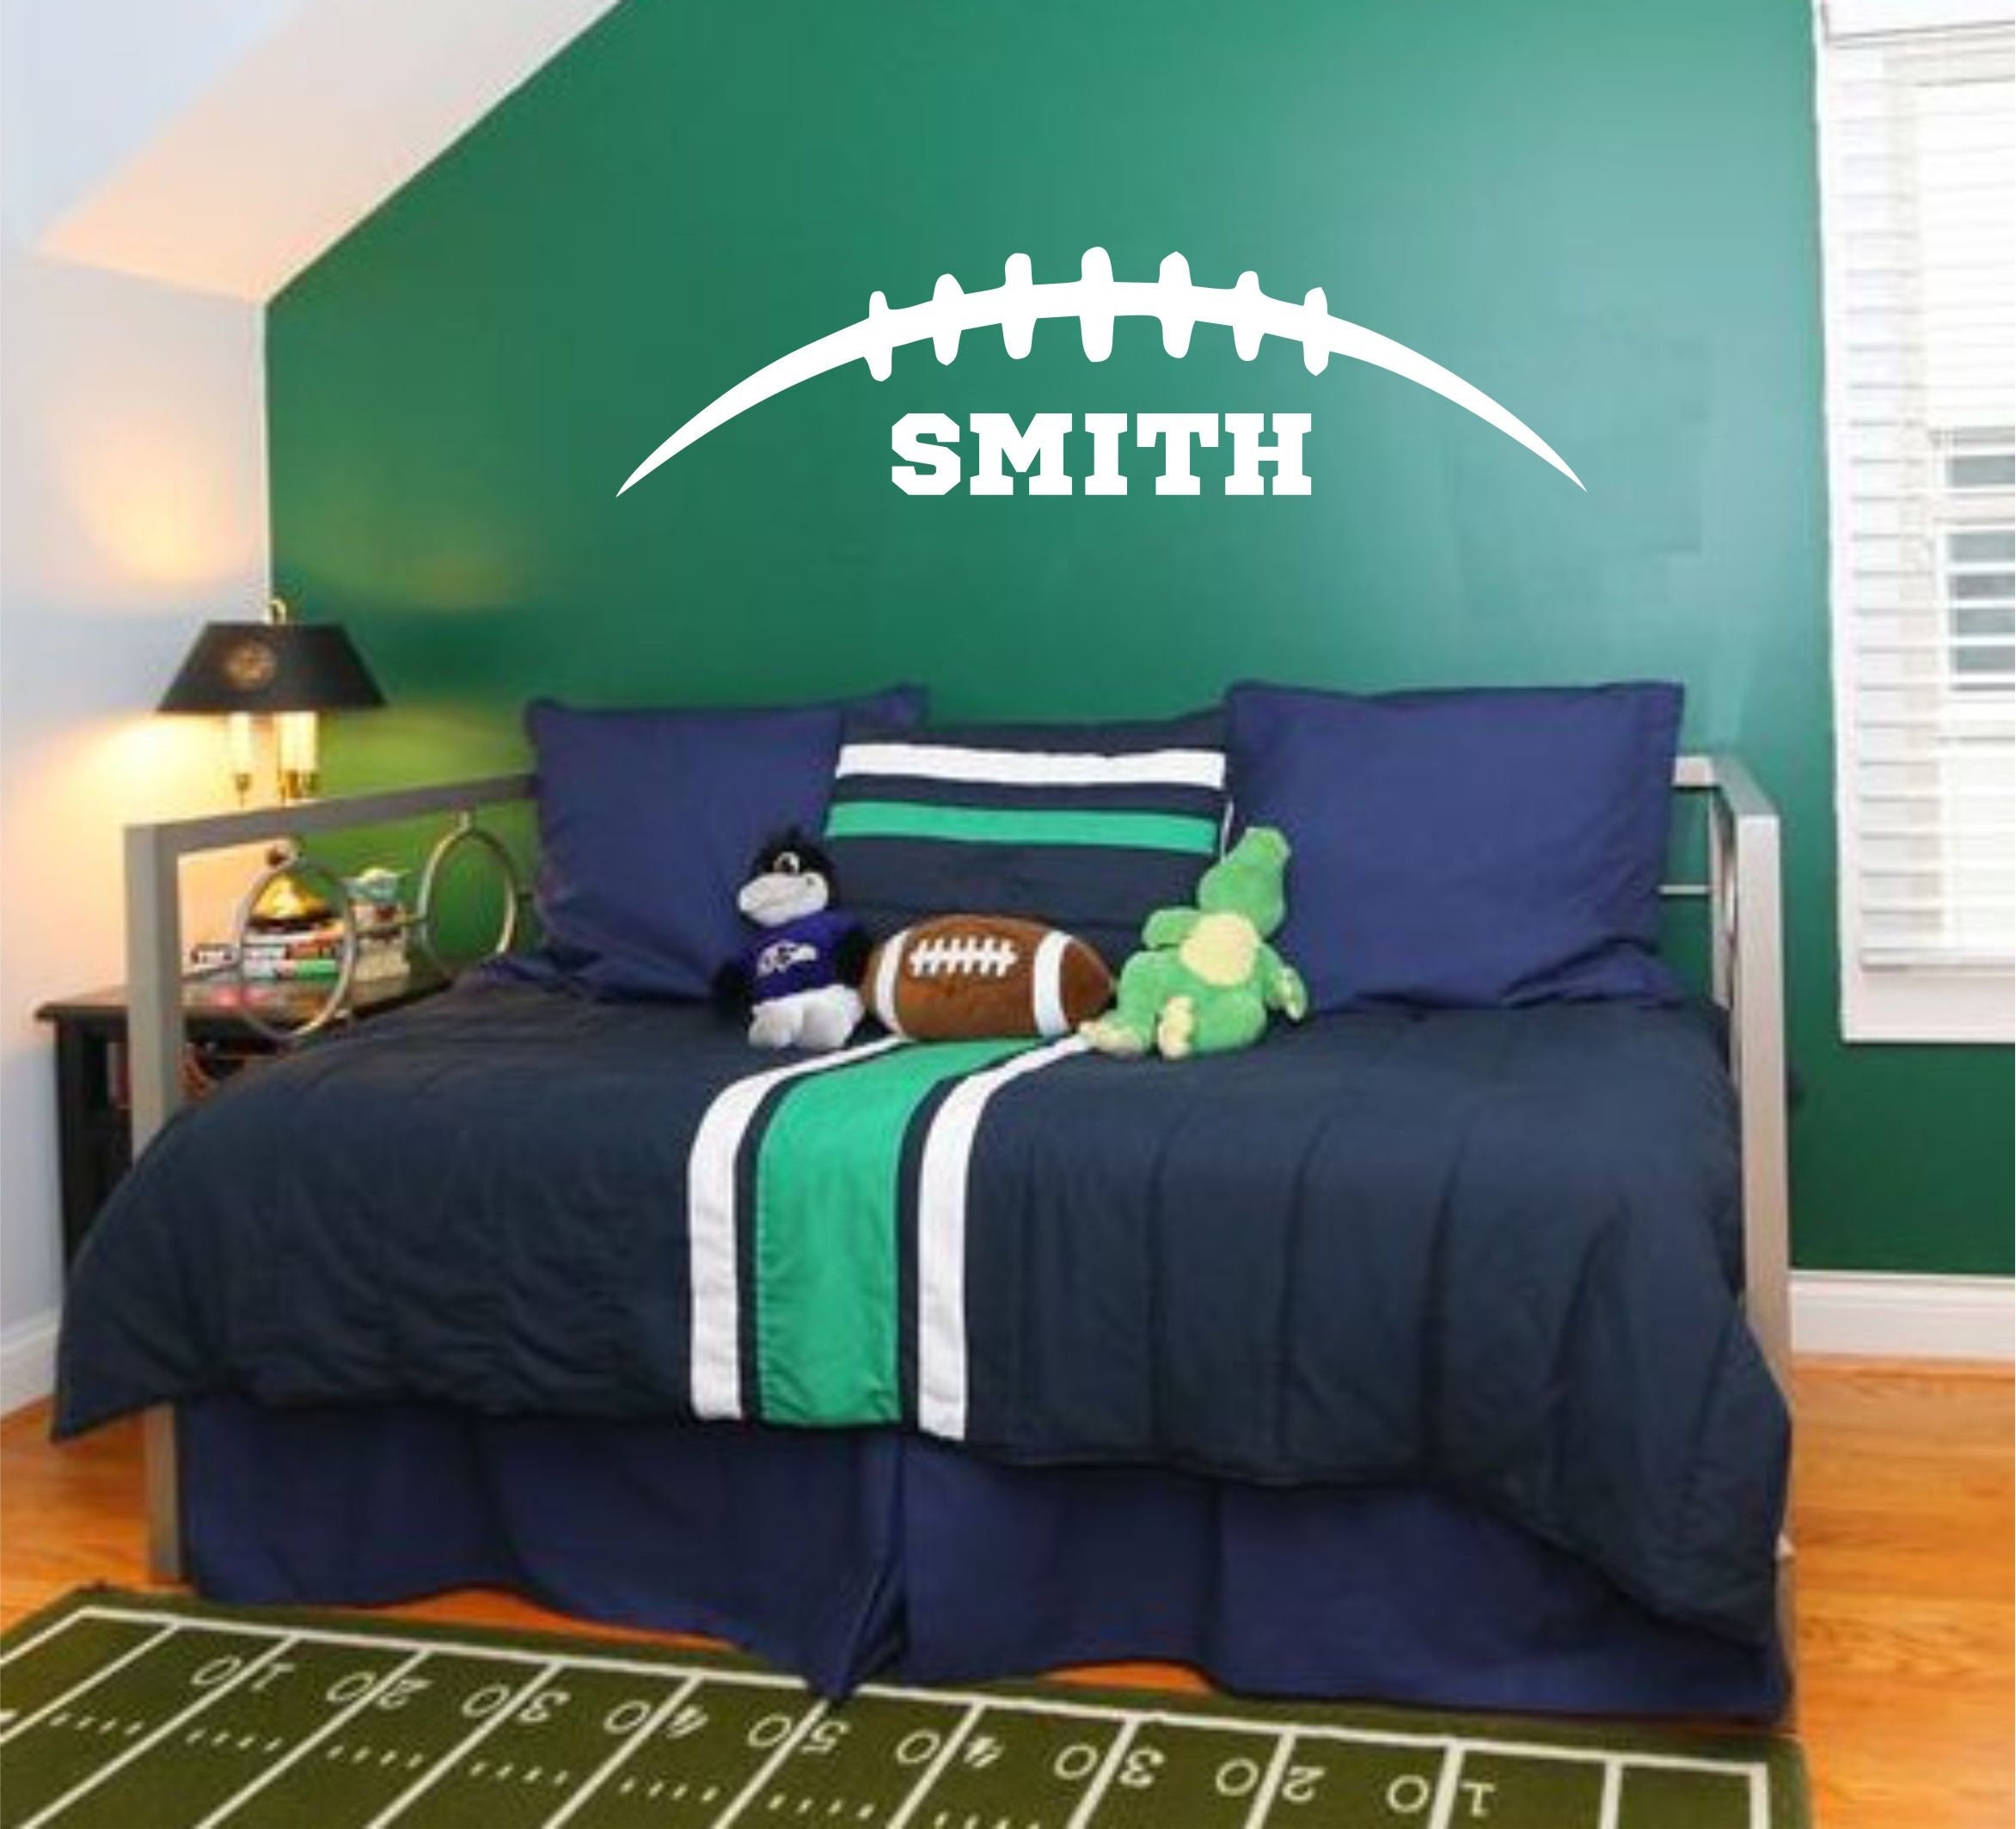 Teen Room Stickers, Football Wall Stickers, Personalized Boy Name